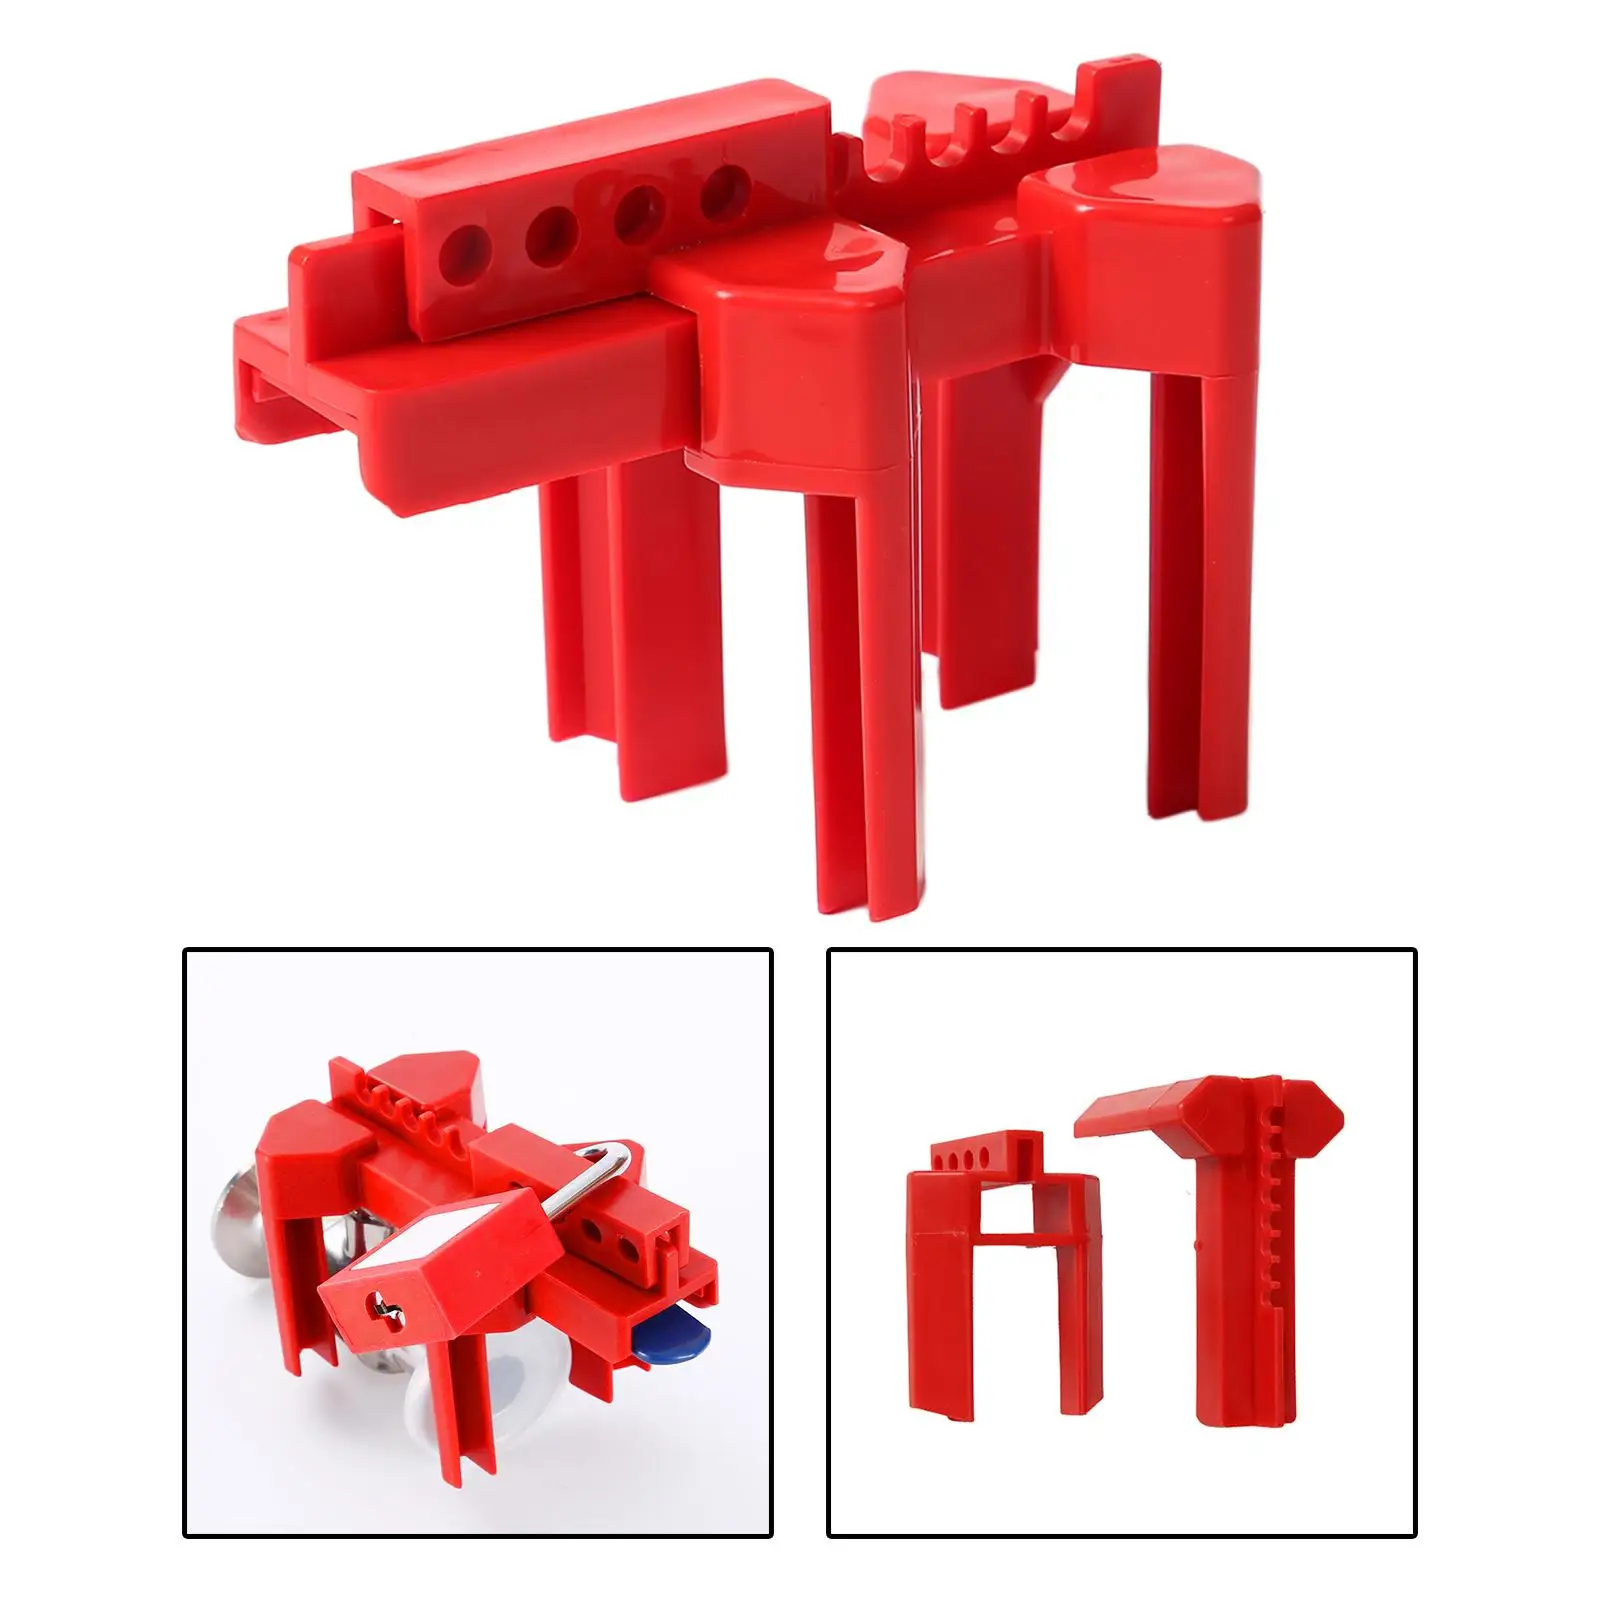 Ball Valve Lockout Outside Pipe Lock Practical Durable Adjustable Sturdy Red Valve Lock for Industrial Transportation